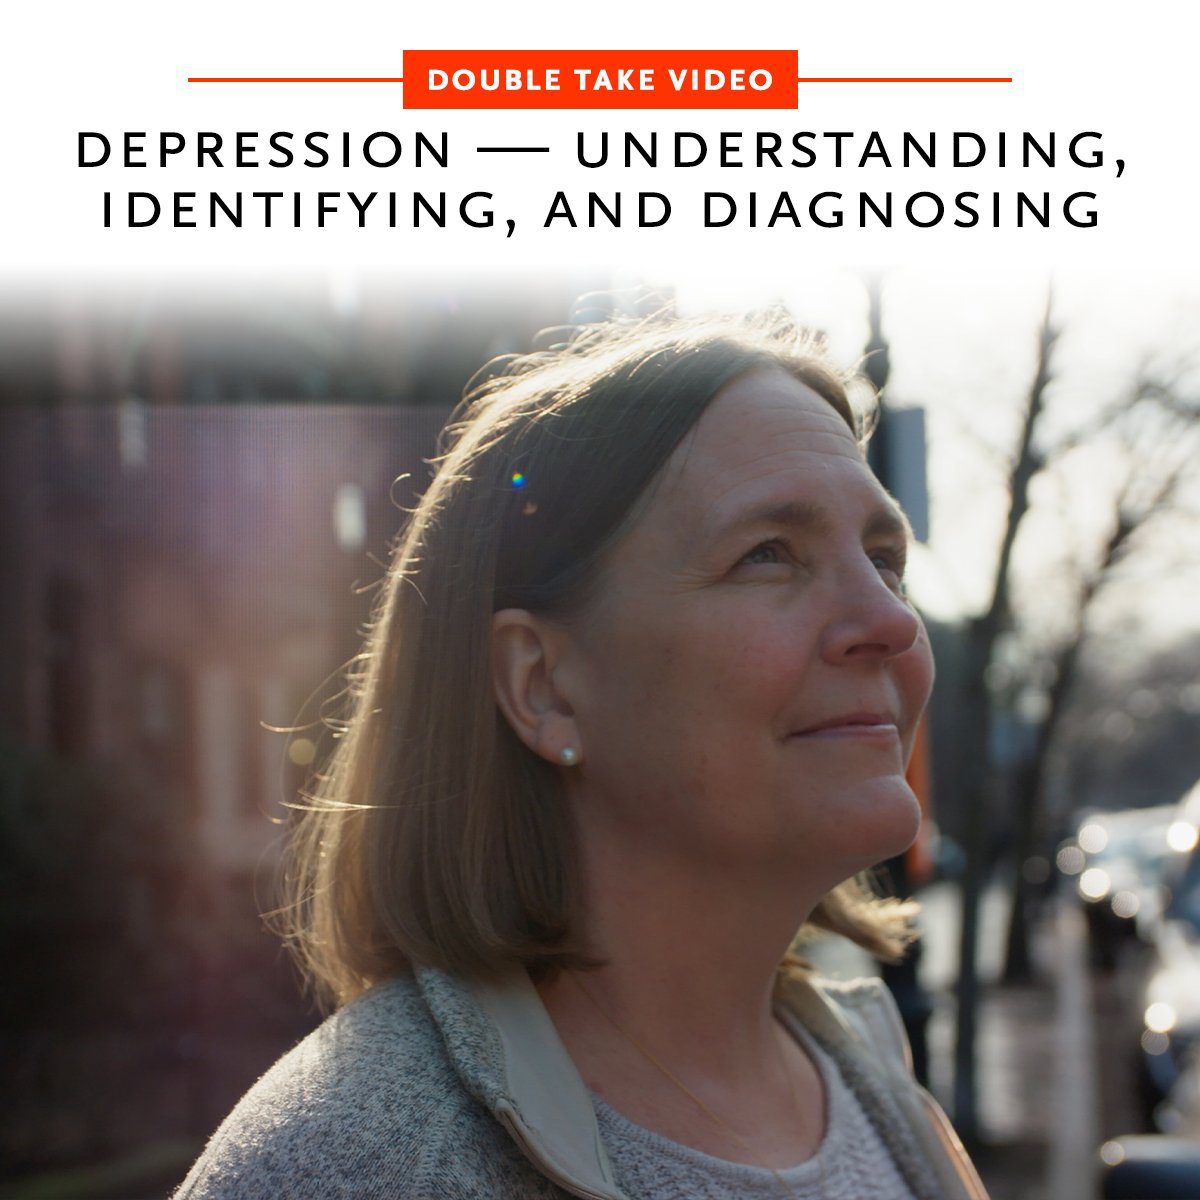 In the first episode of a four-part Double Take video miniseries, Dr. @ScottVernaglia recounts her personal experiences with depression. Watch now: nej.md/4aVmYka